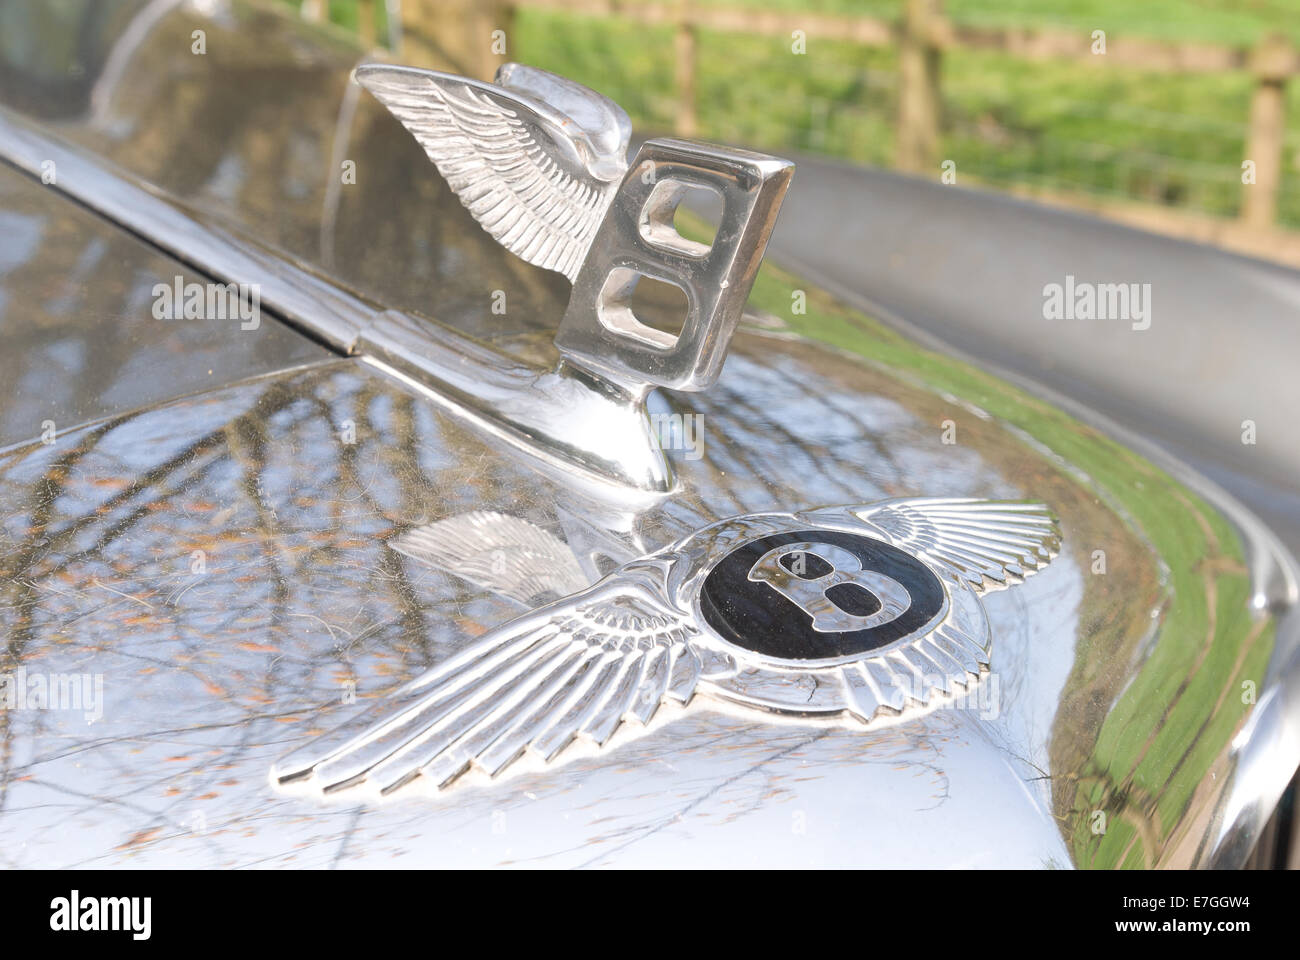 Winged Bentley logo emblem and metal badge on bonnet shiny silver car front classic collectors iconic symbol Stock Photo